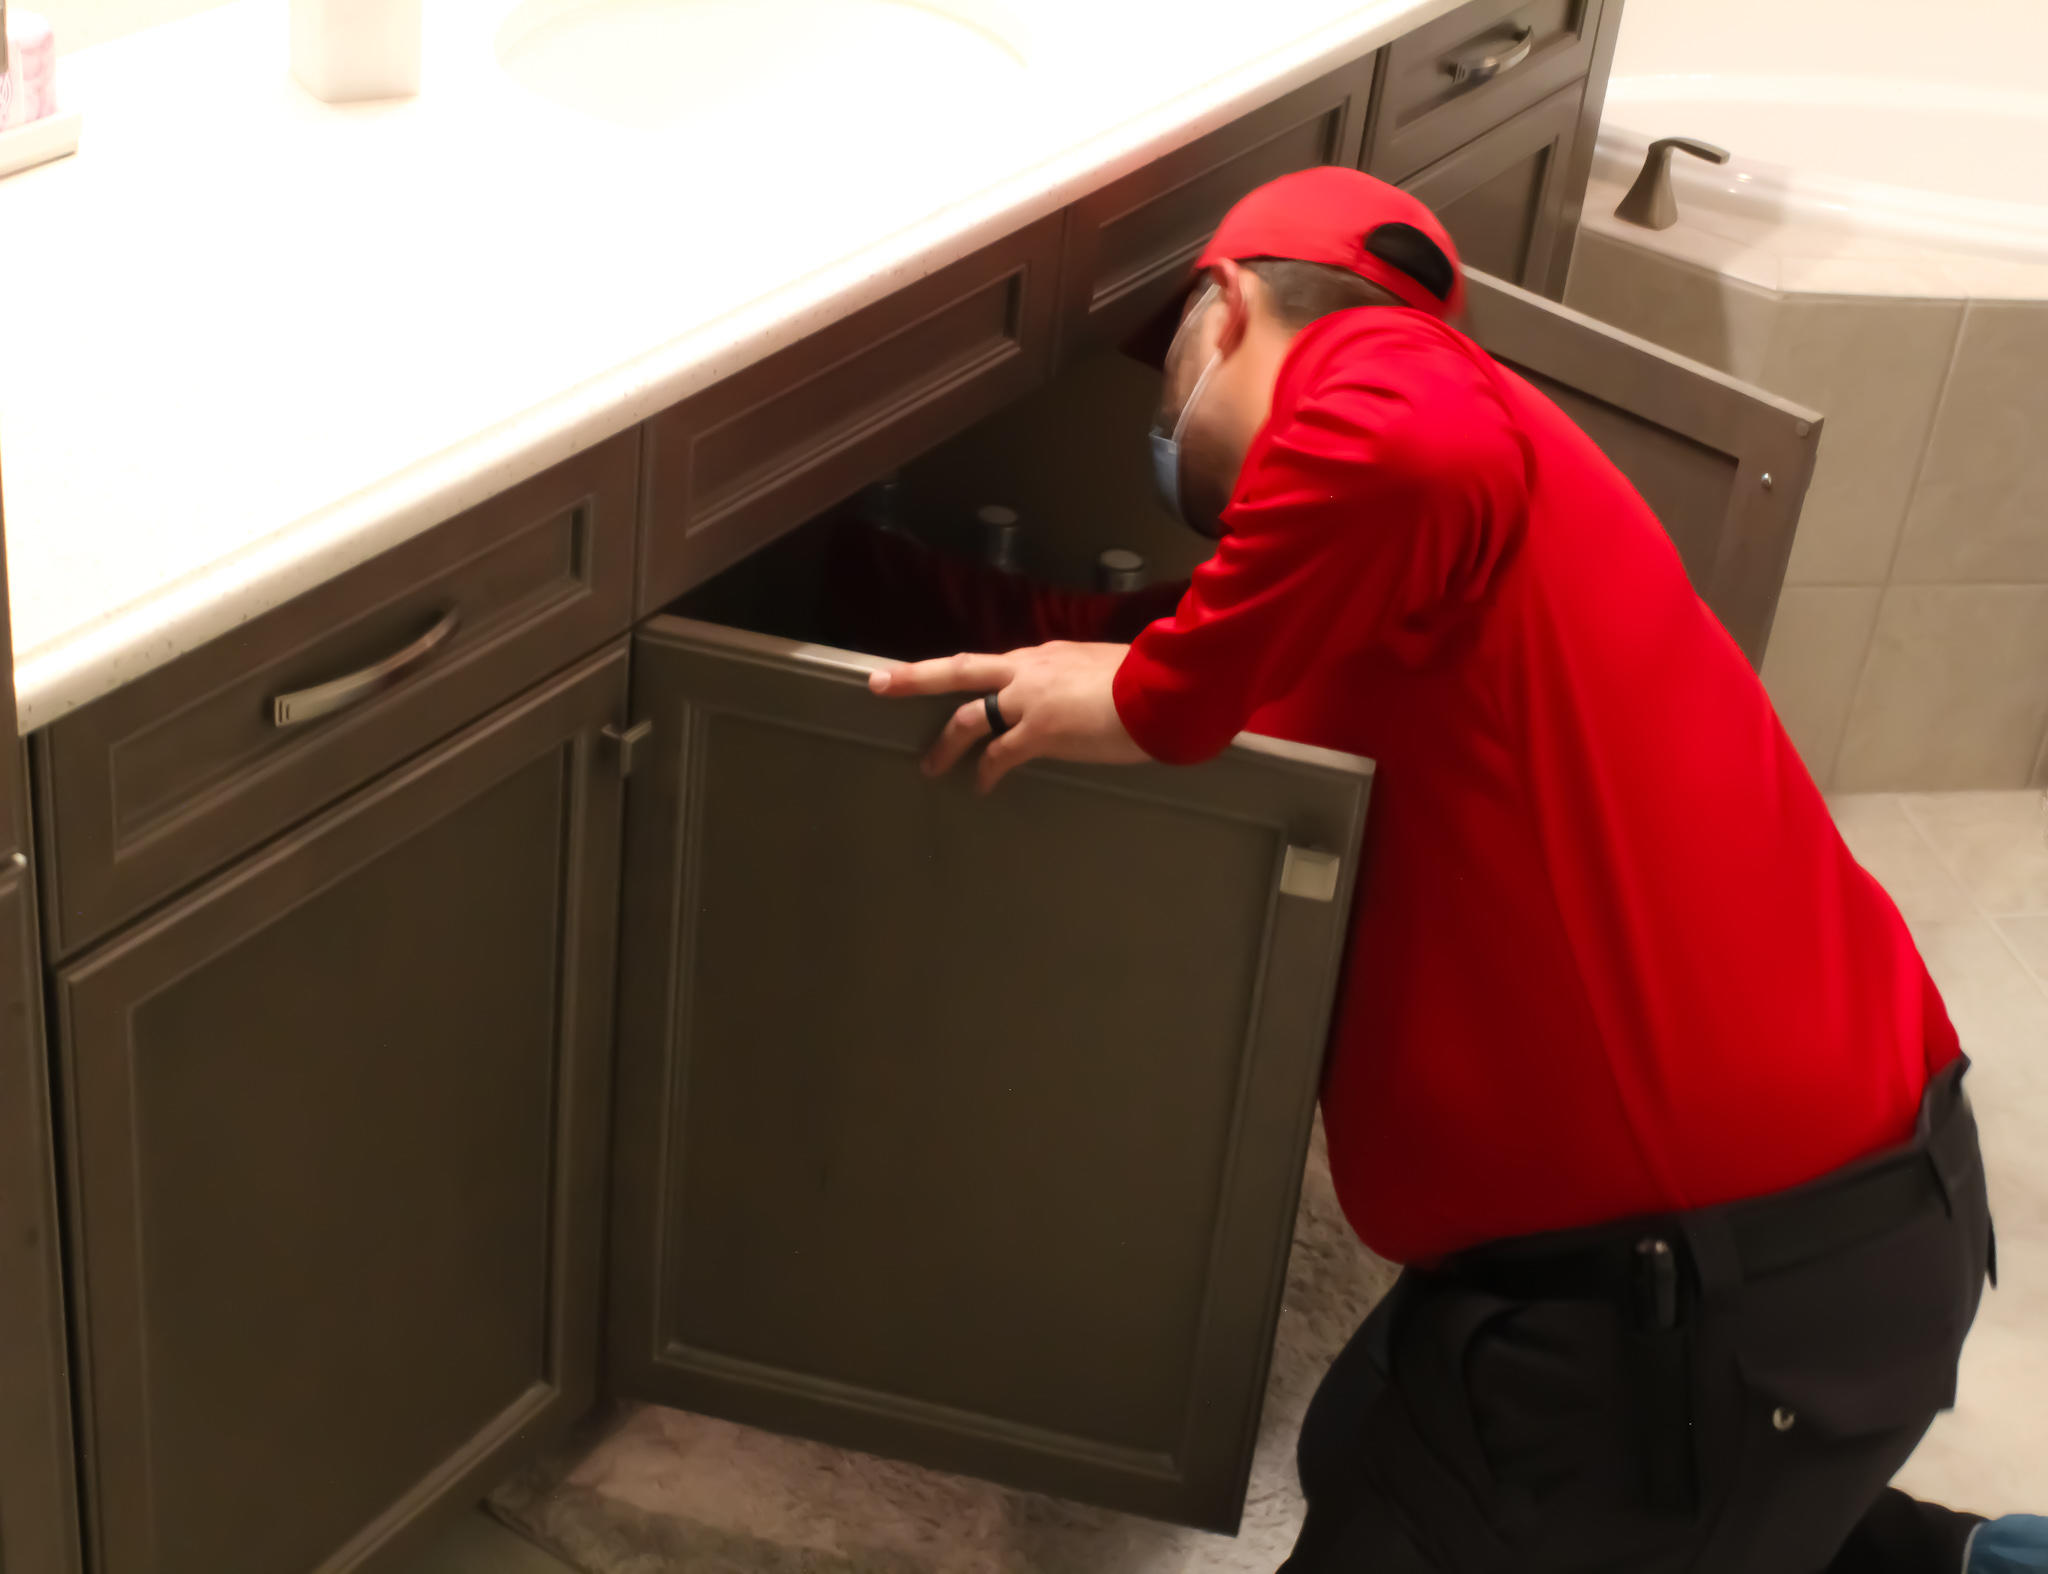 To eliminate pests, you must think like one. This is why our technicians are so highly trained, they know where they like to hide and where they enter your home or business from. Call us today to learn how we can protect your property and family.